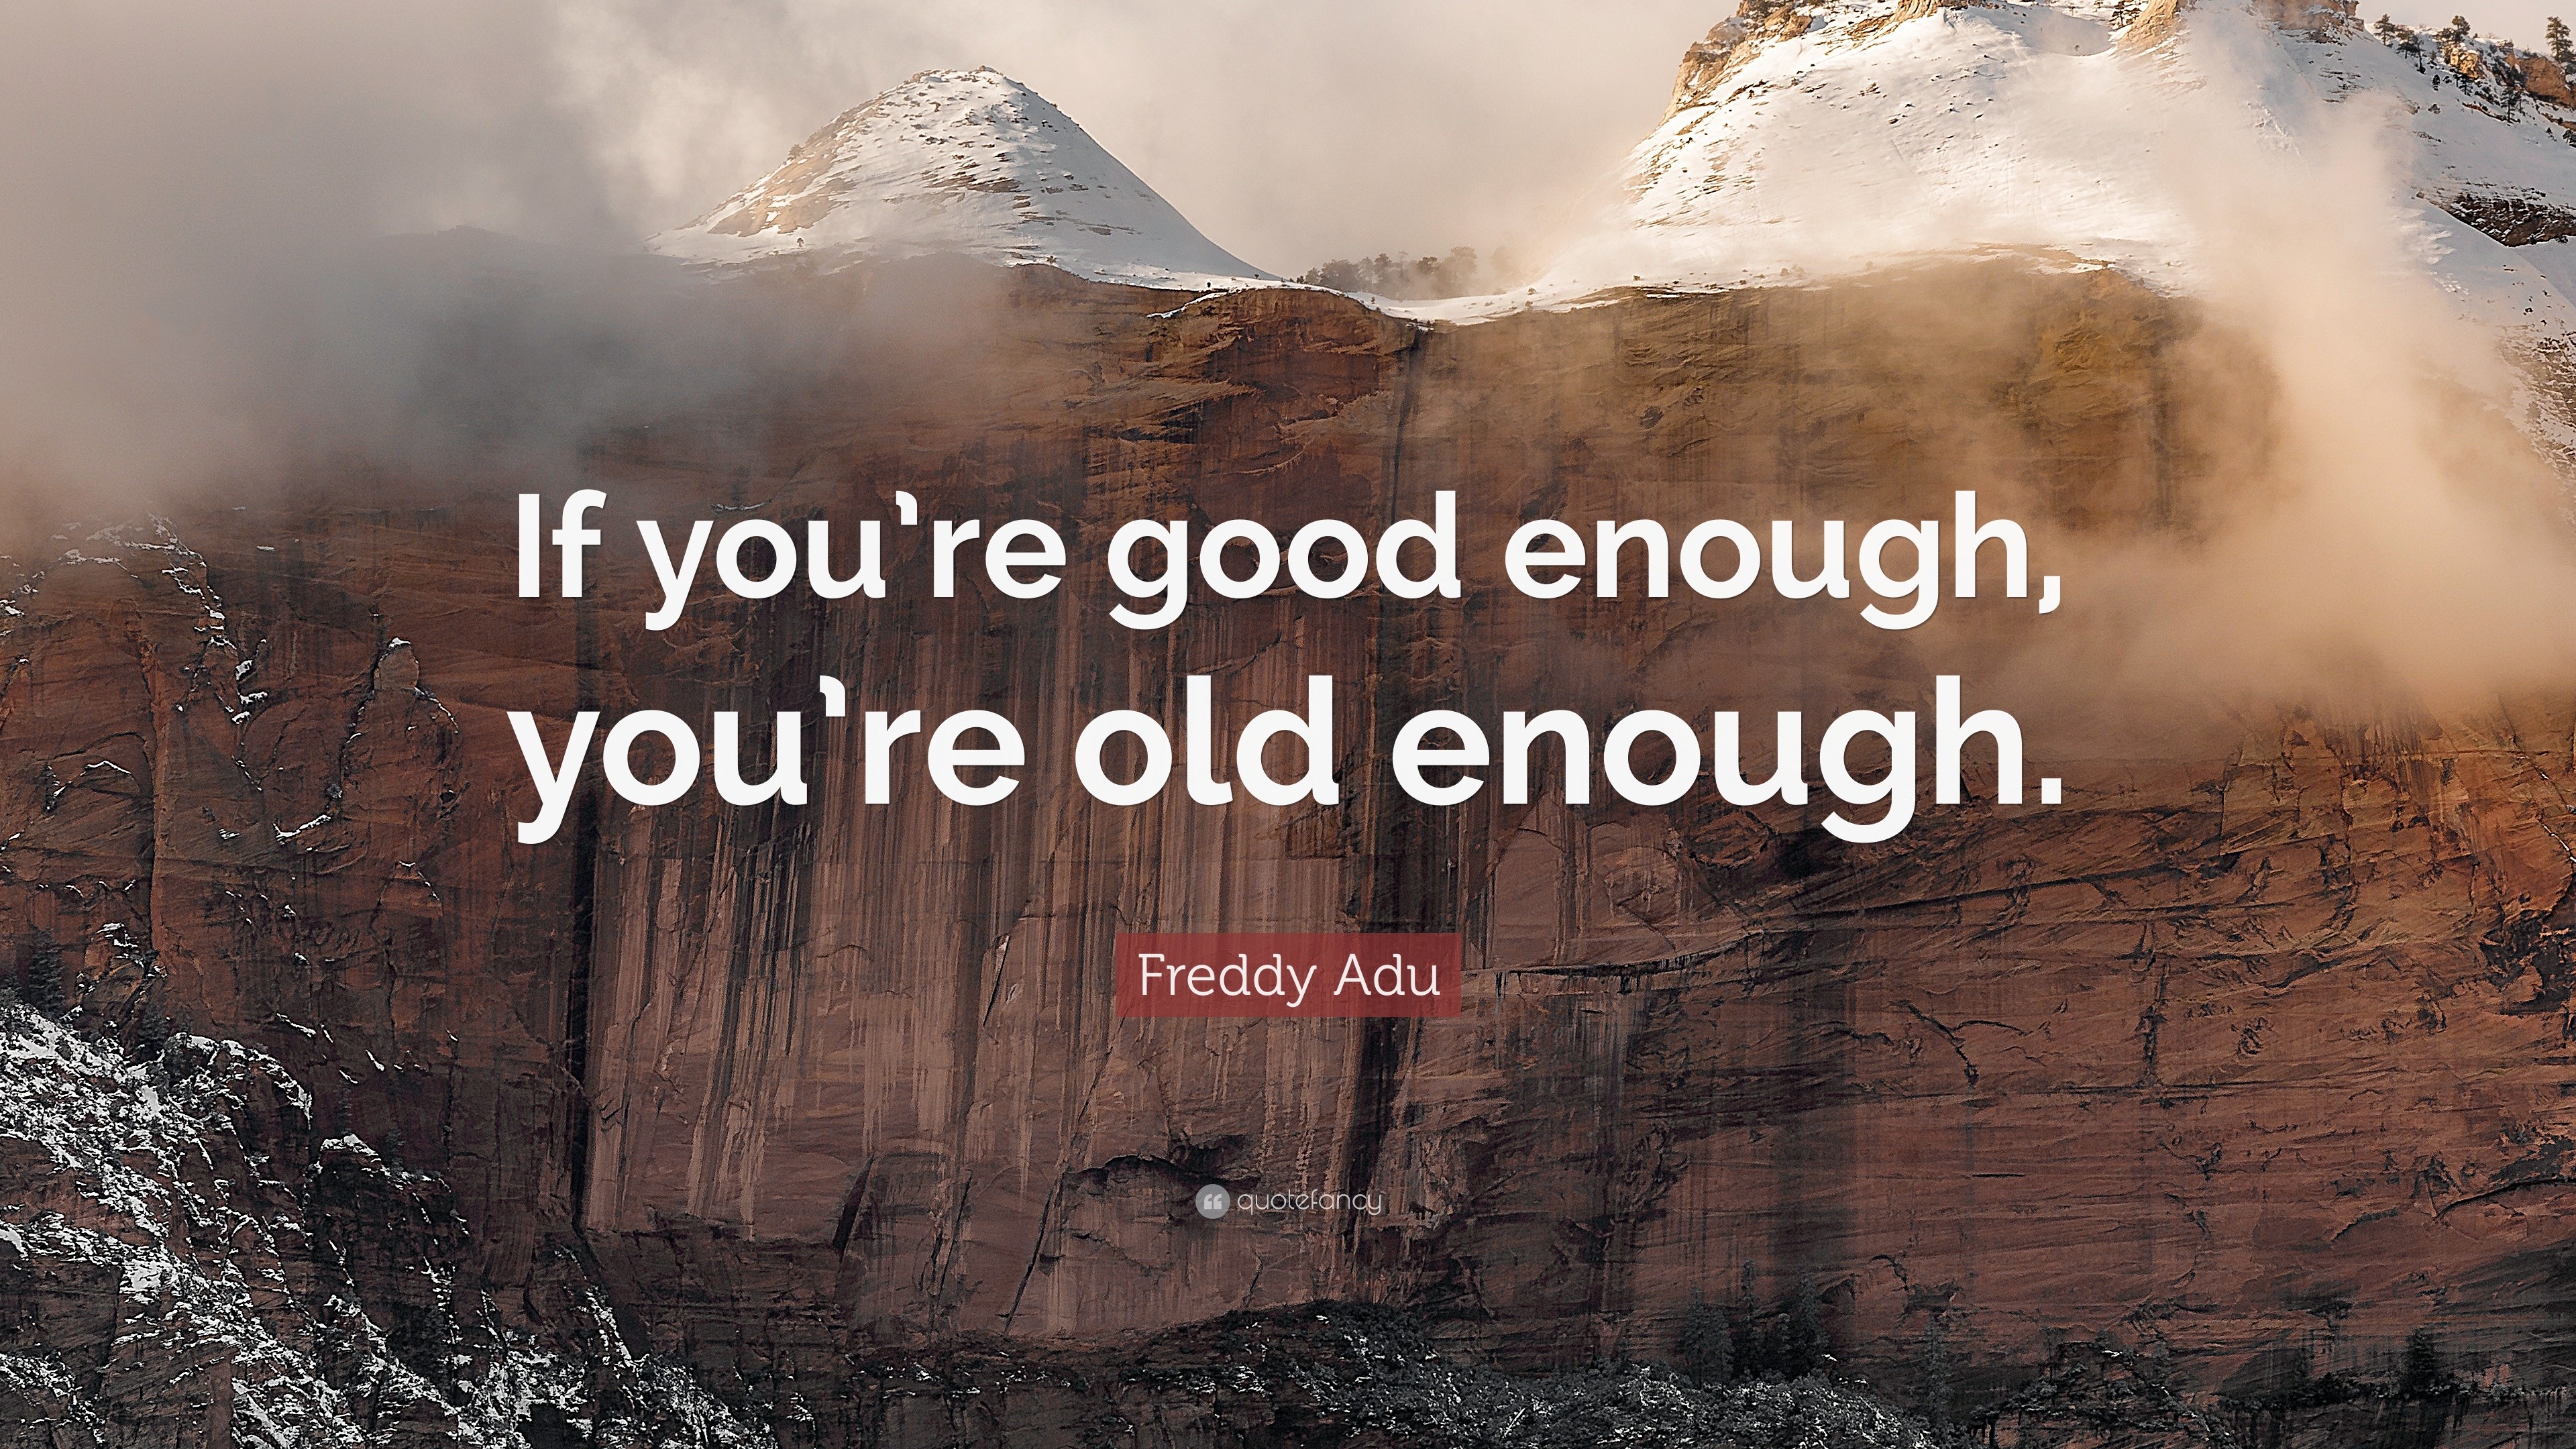 Freddy Adu Quote If You Re Good Enough You Re Old Enough 10 Wallpapers Quotefancy